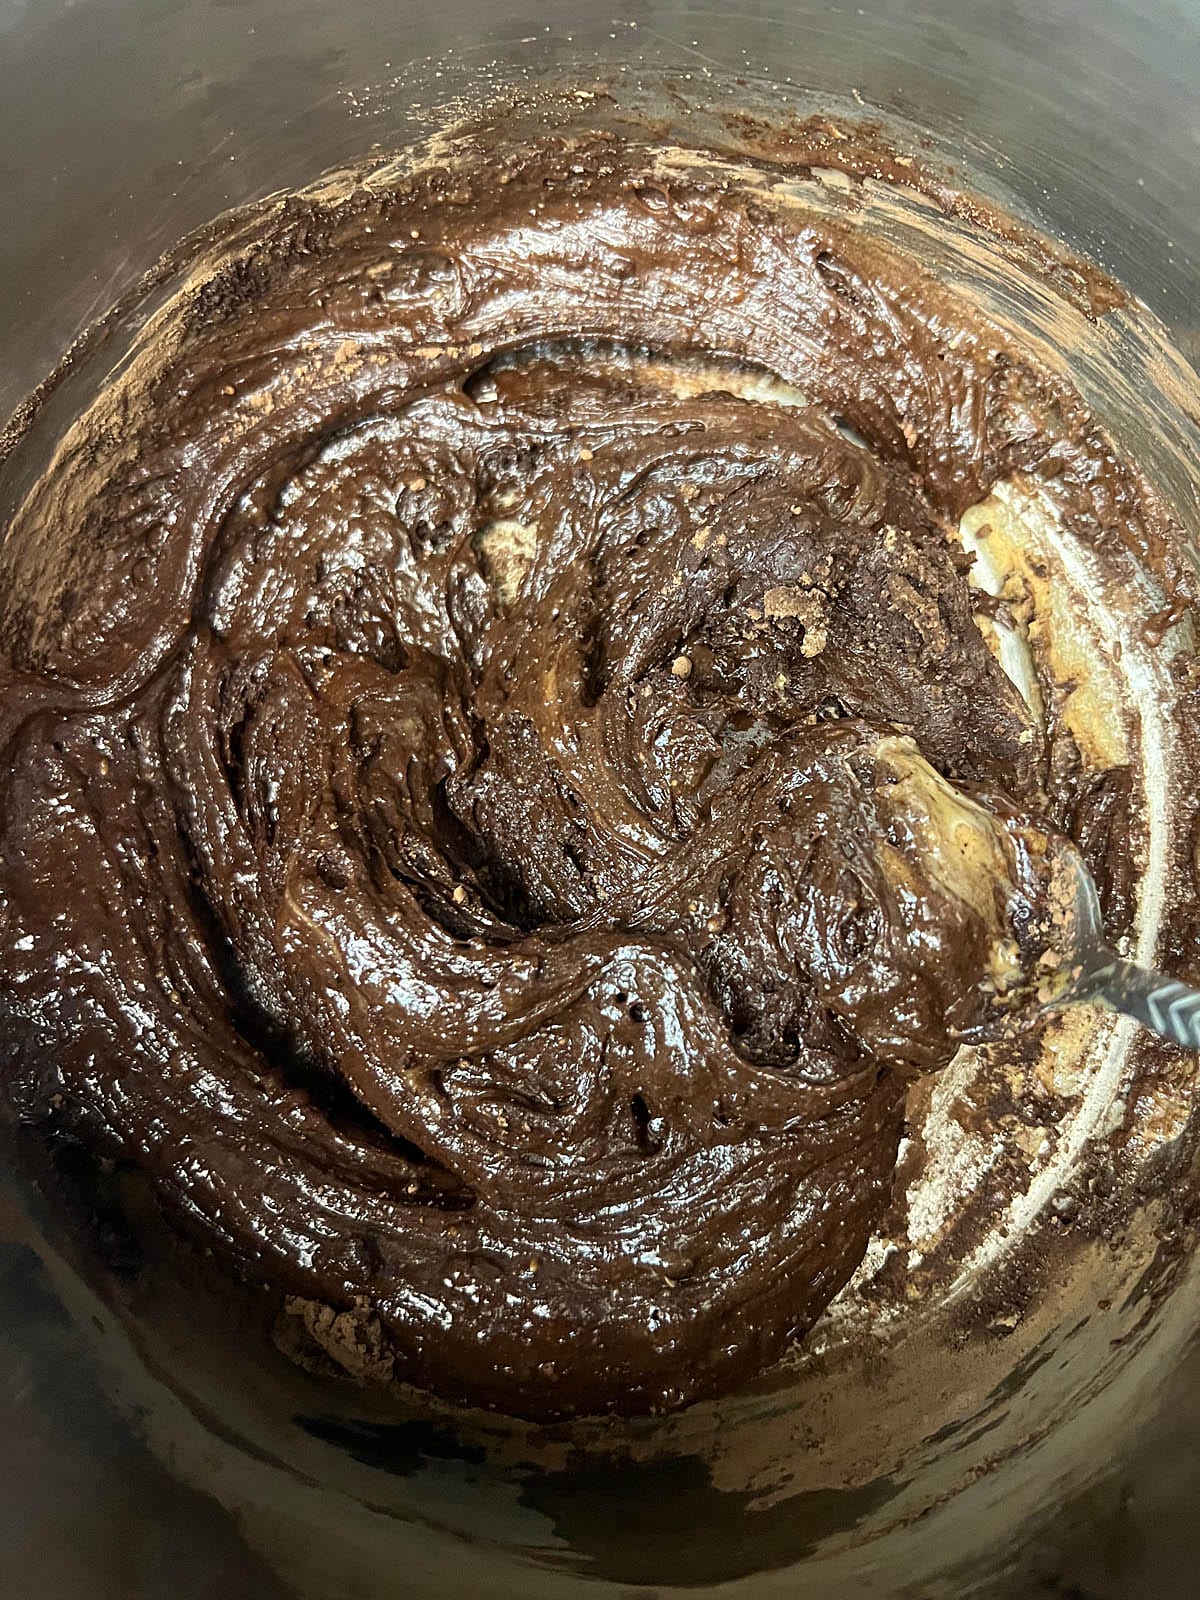 Chocolate peanut butter mixture in a saucepan after heating and mixing.